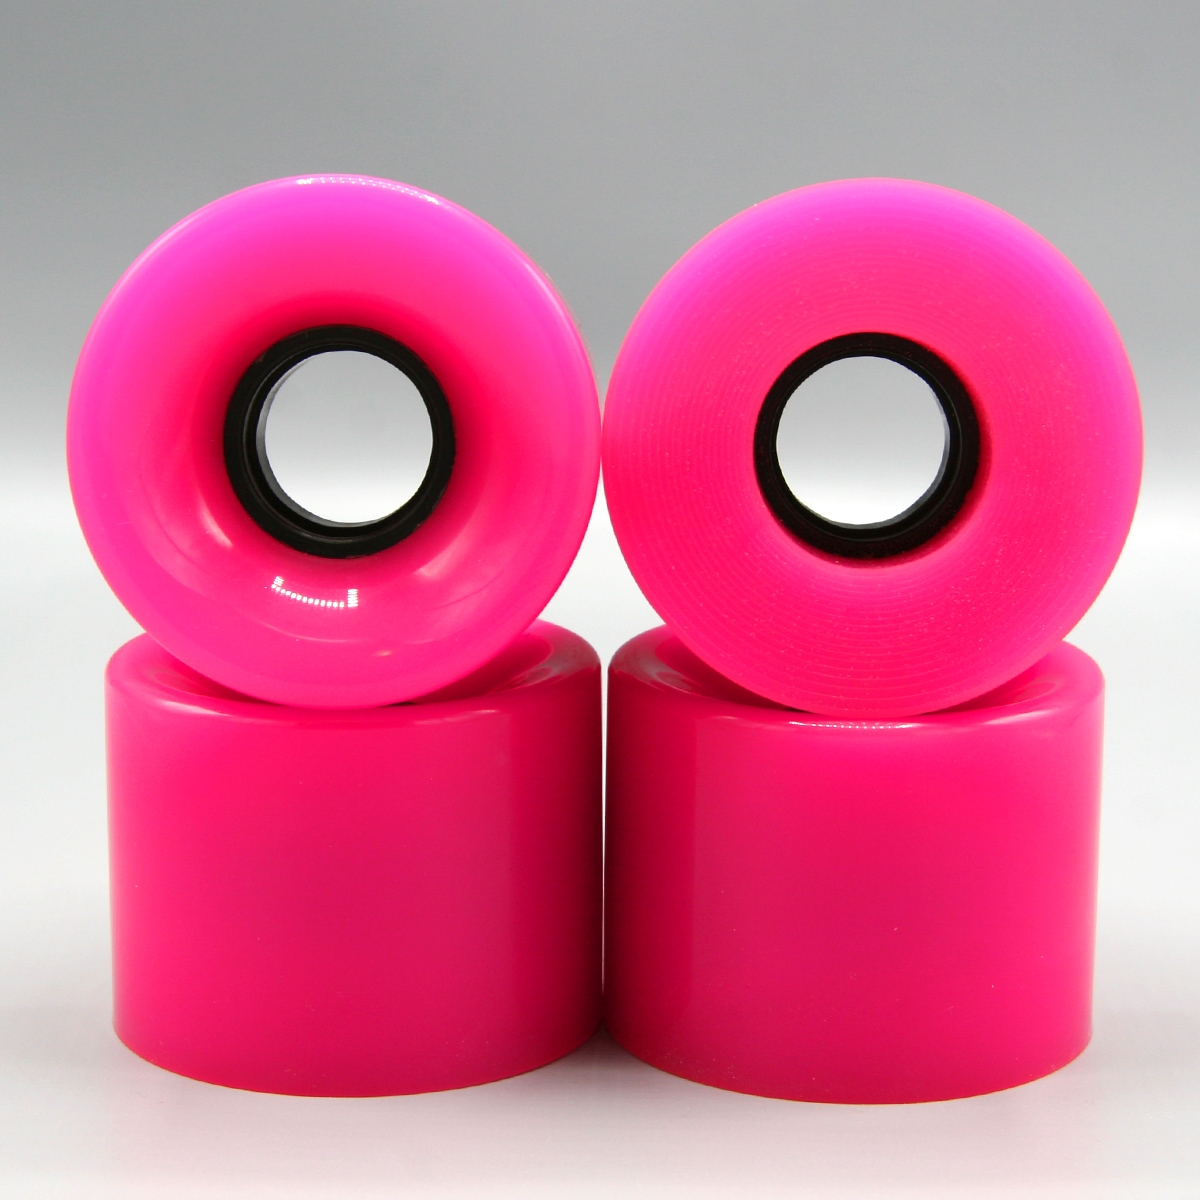 Blank 60mm (Solid Pink) - Includes 1/4" Risers